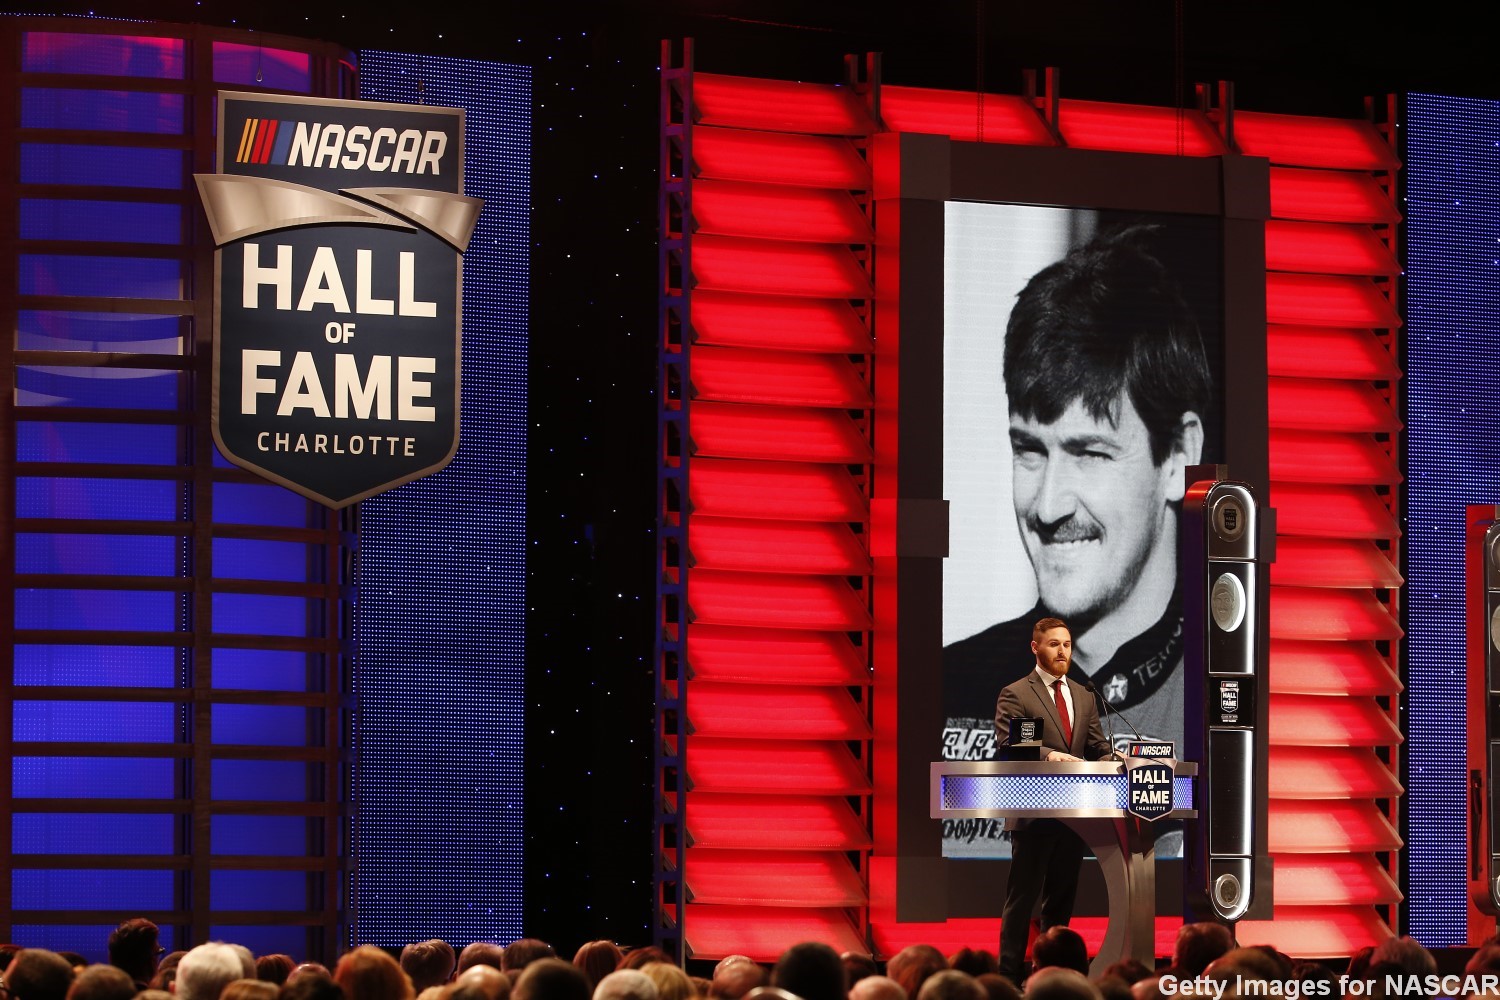 Robbie Allison speaks as Davey Allison is inducted into the NASCAR Hall of Fame